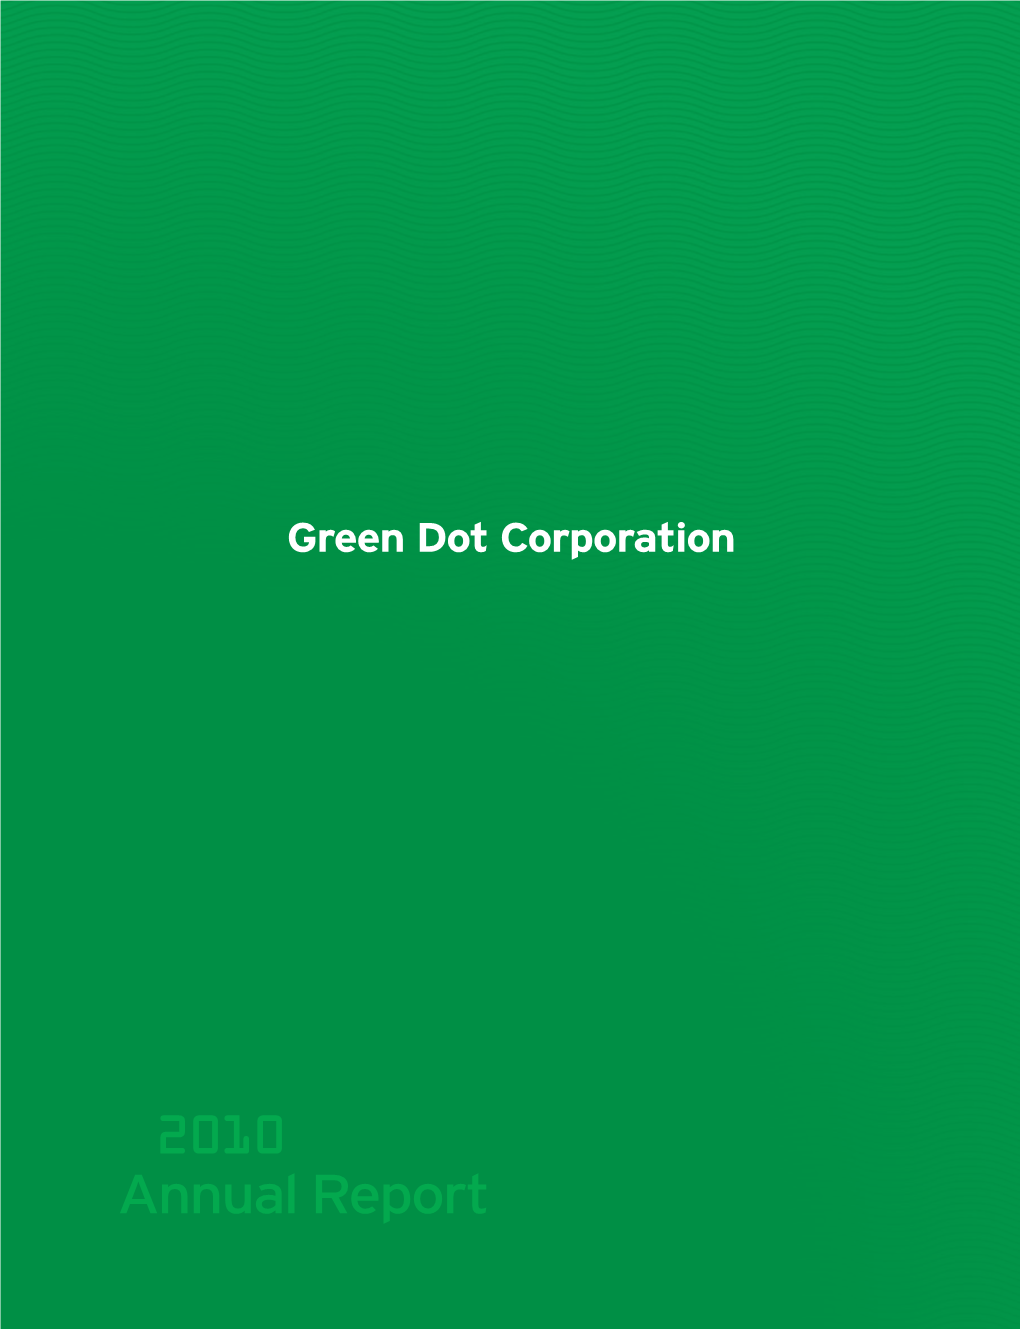 GREEN DOT CORPORATION (Exact Name of Registrant As Specified in Its Charter)